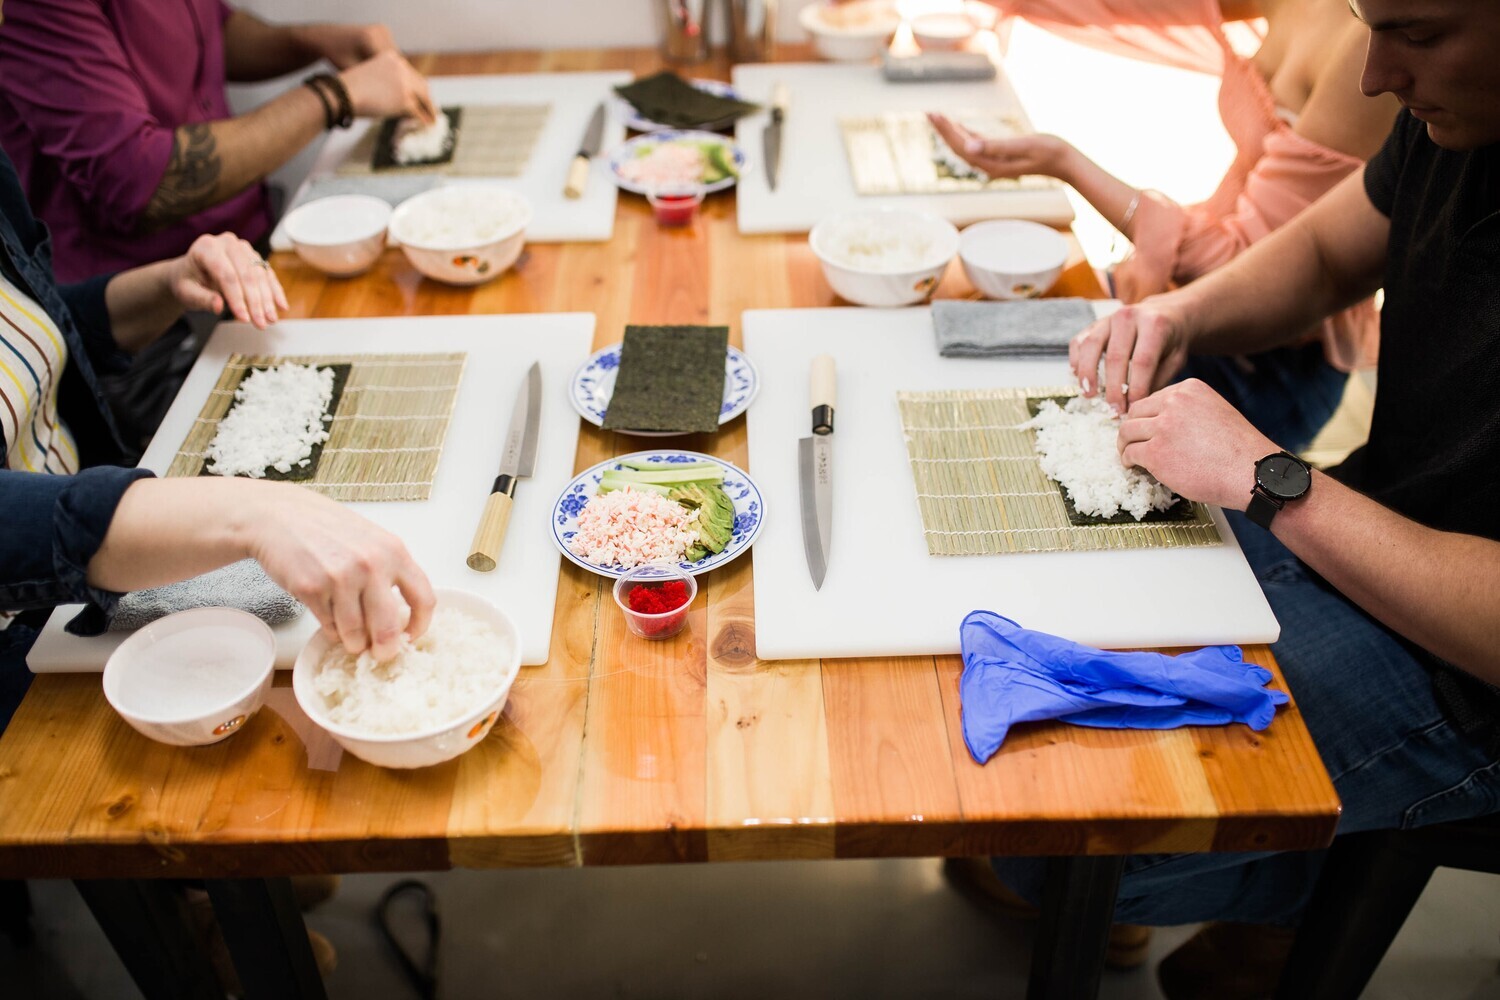 12/11/22 - Intro to Making Sushi Class